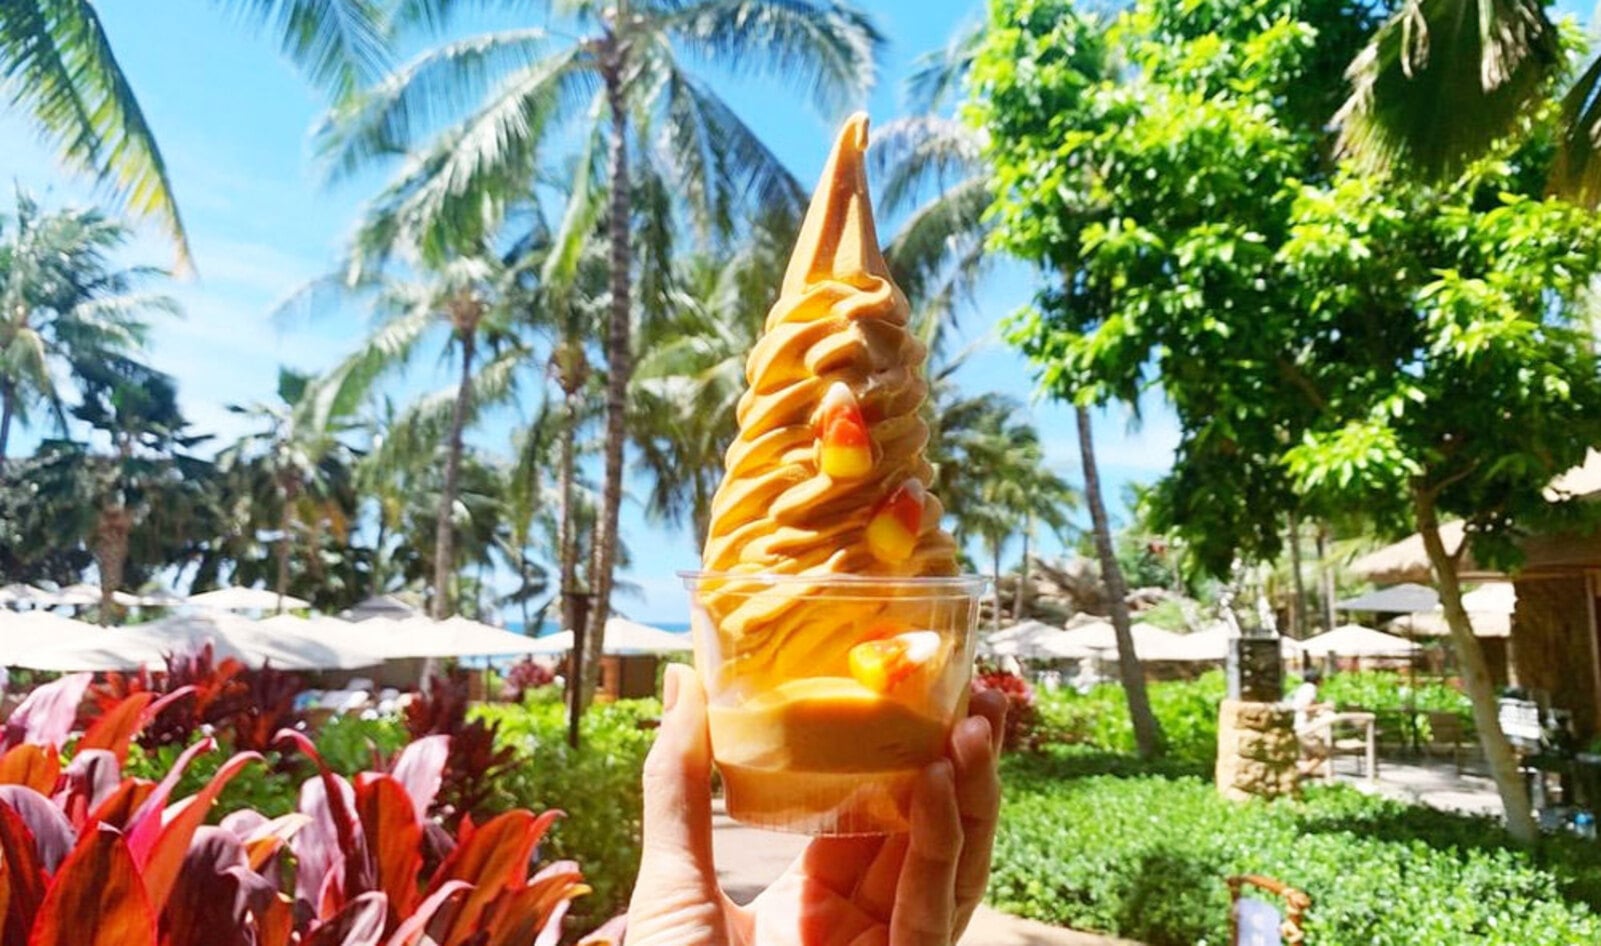 Disney’s Vegan Pumpkin Spice Dole Whip Is Back But There’s a Catch